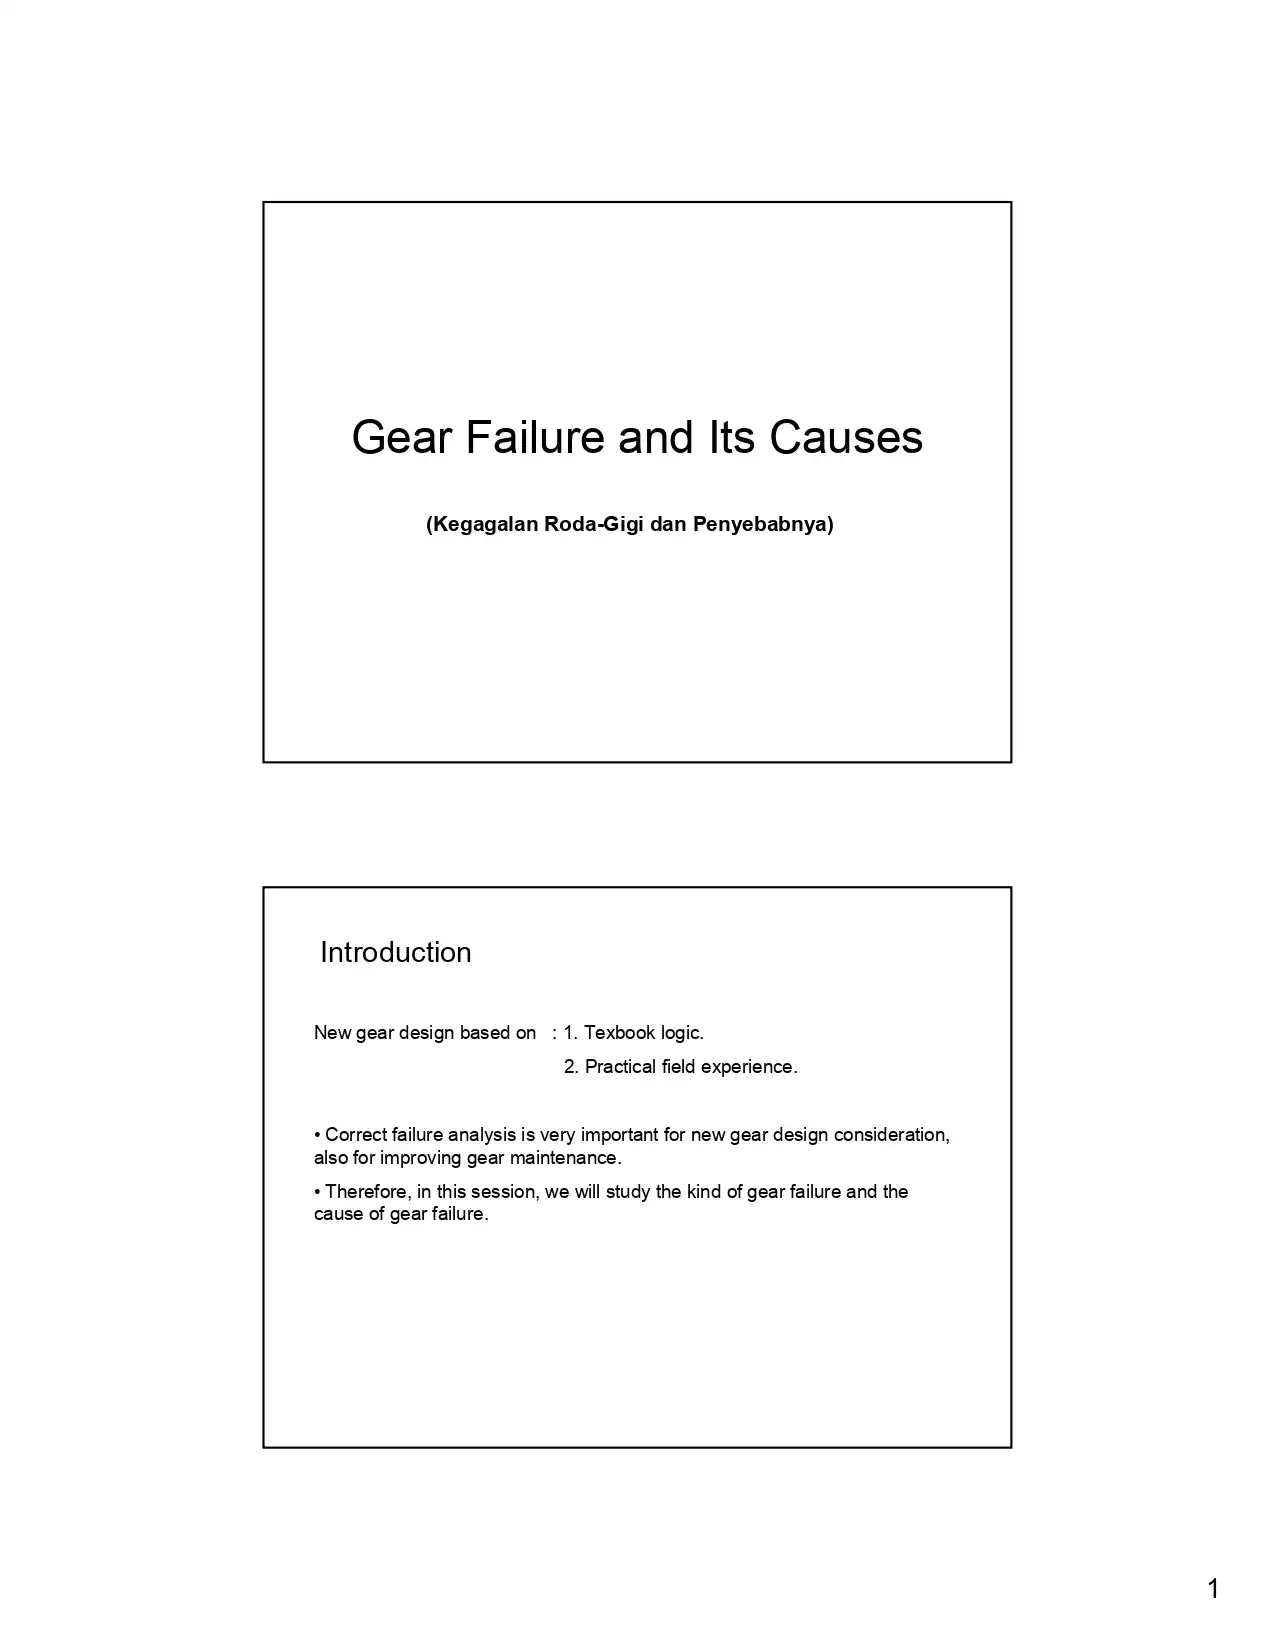 Gear Failure and Its Causes